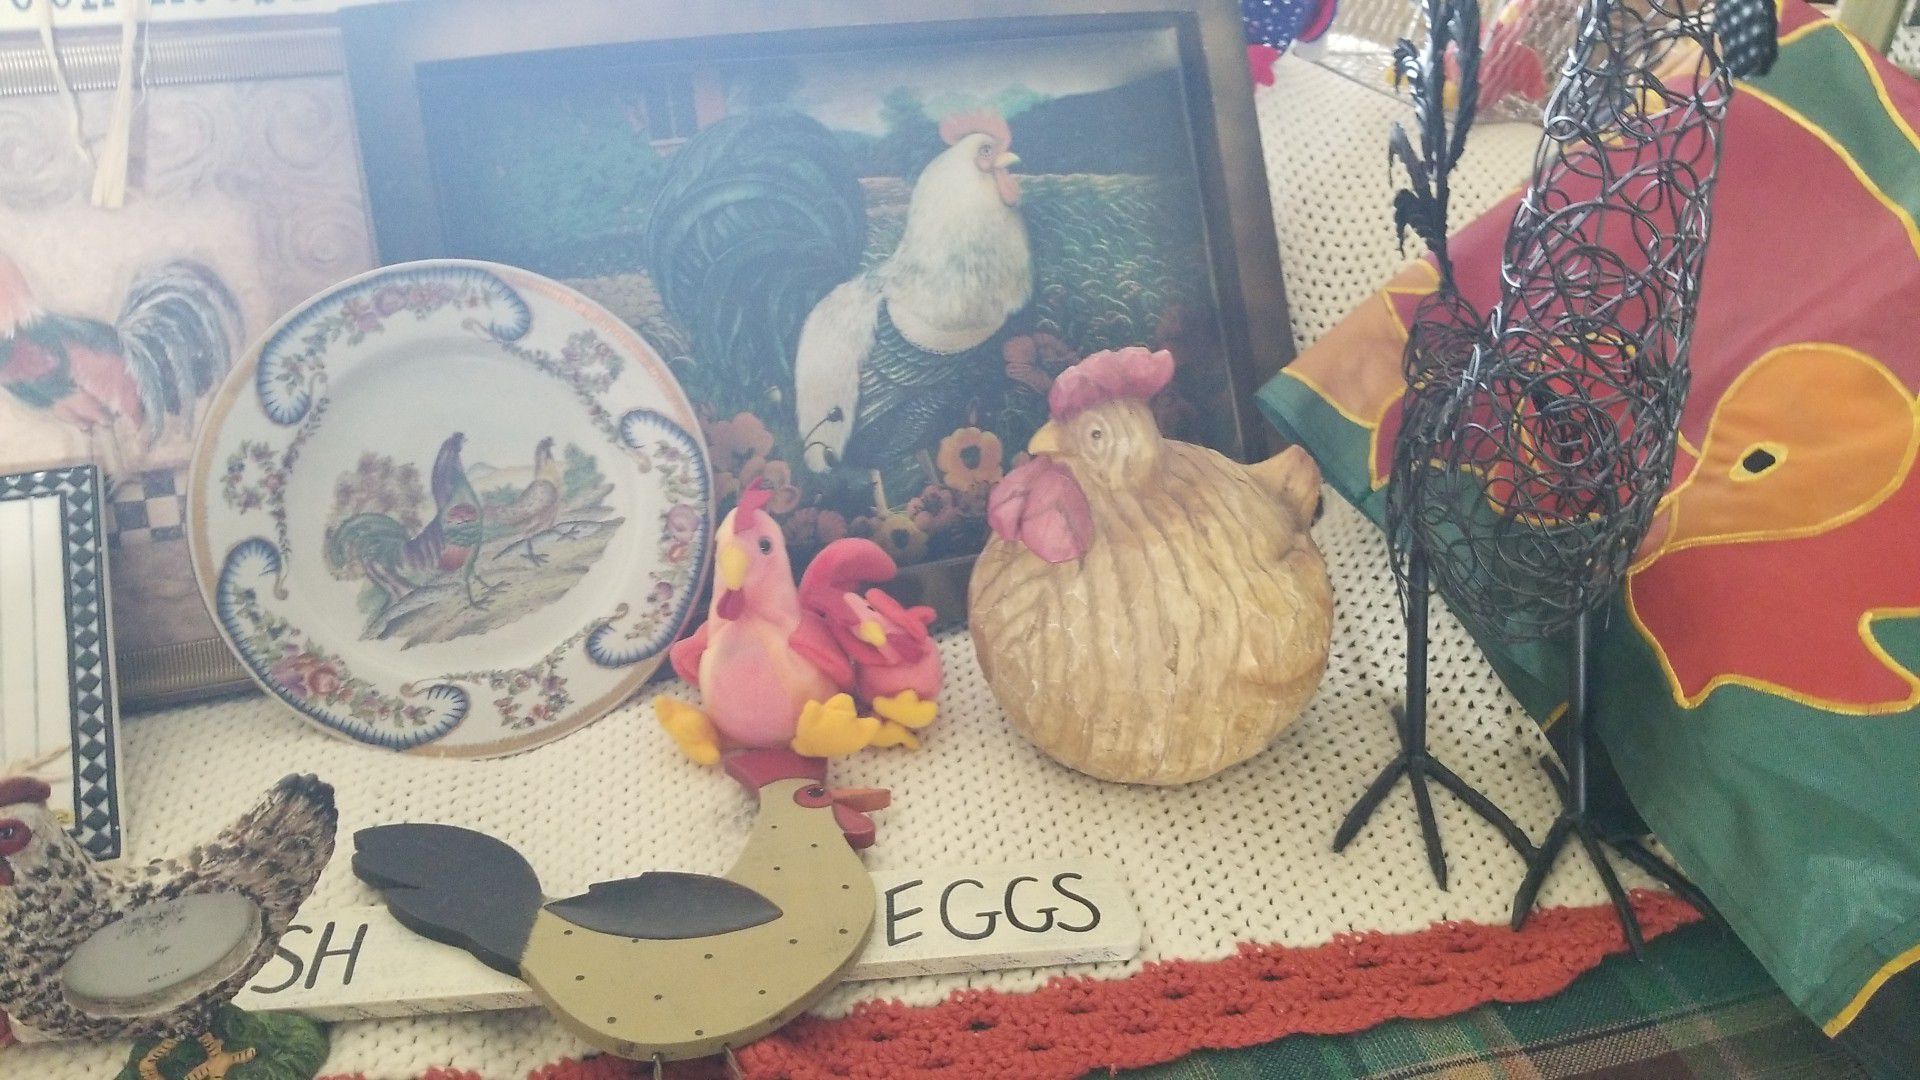 Chicken and rooster decor